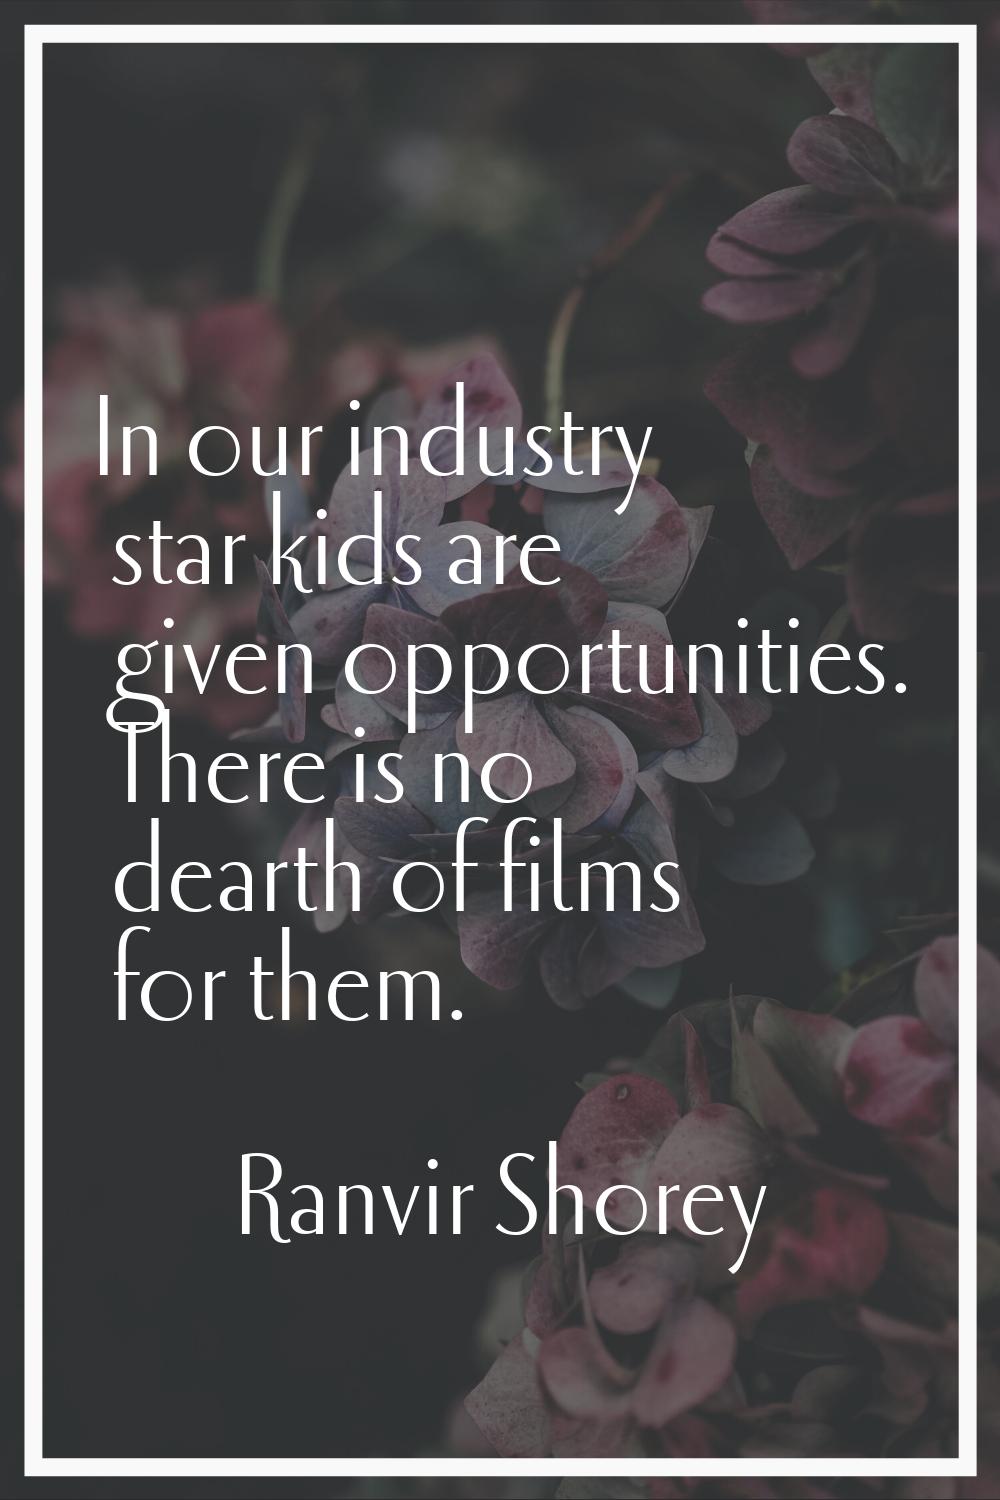 In our industry star kids are given opportunities. There is no dearth of films for them.